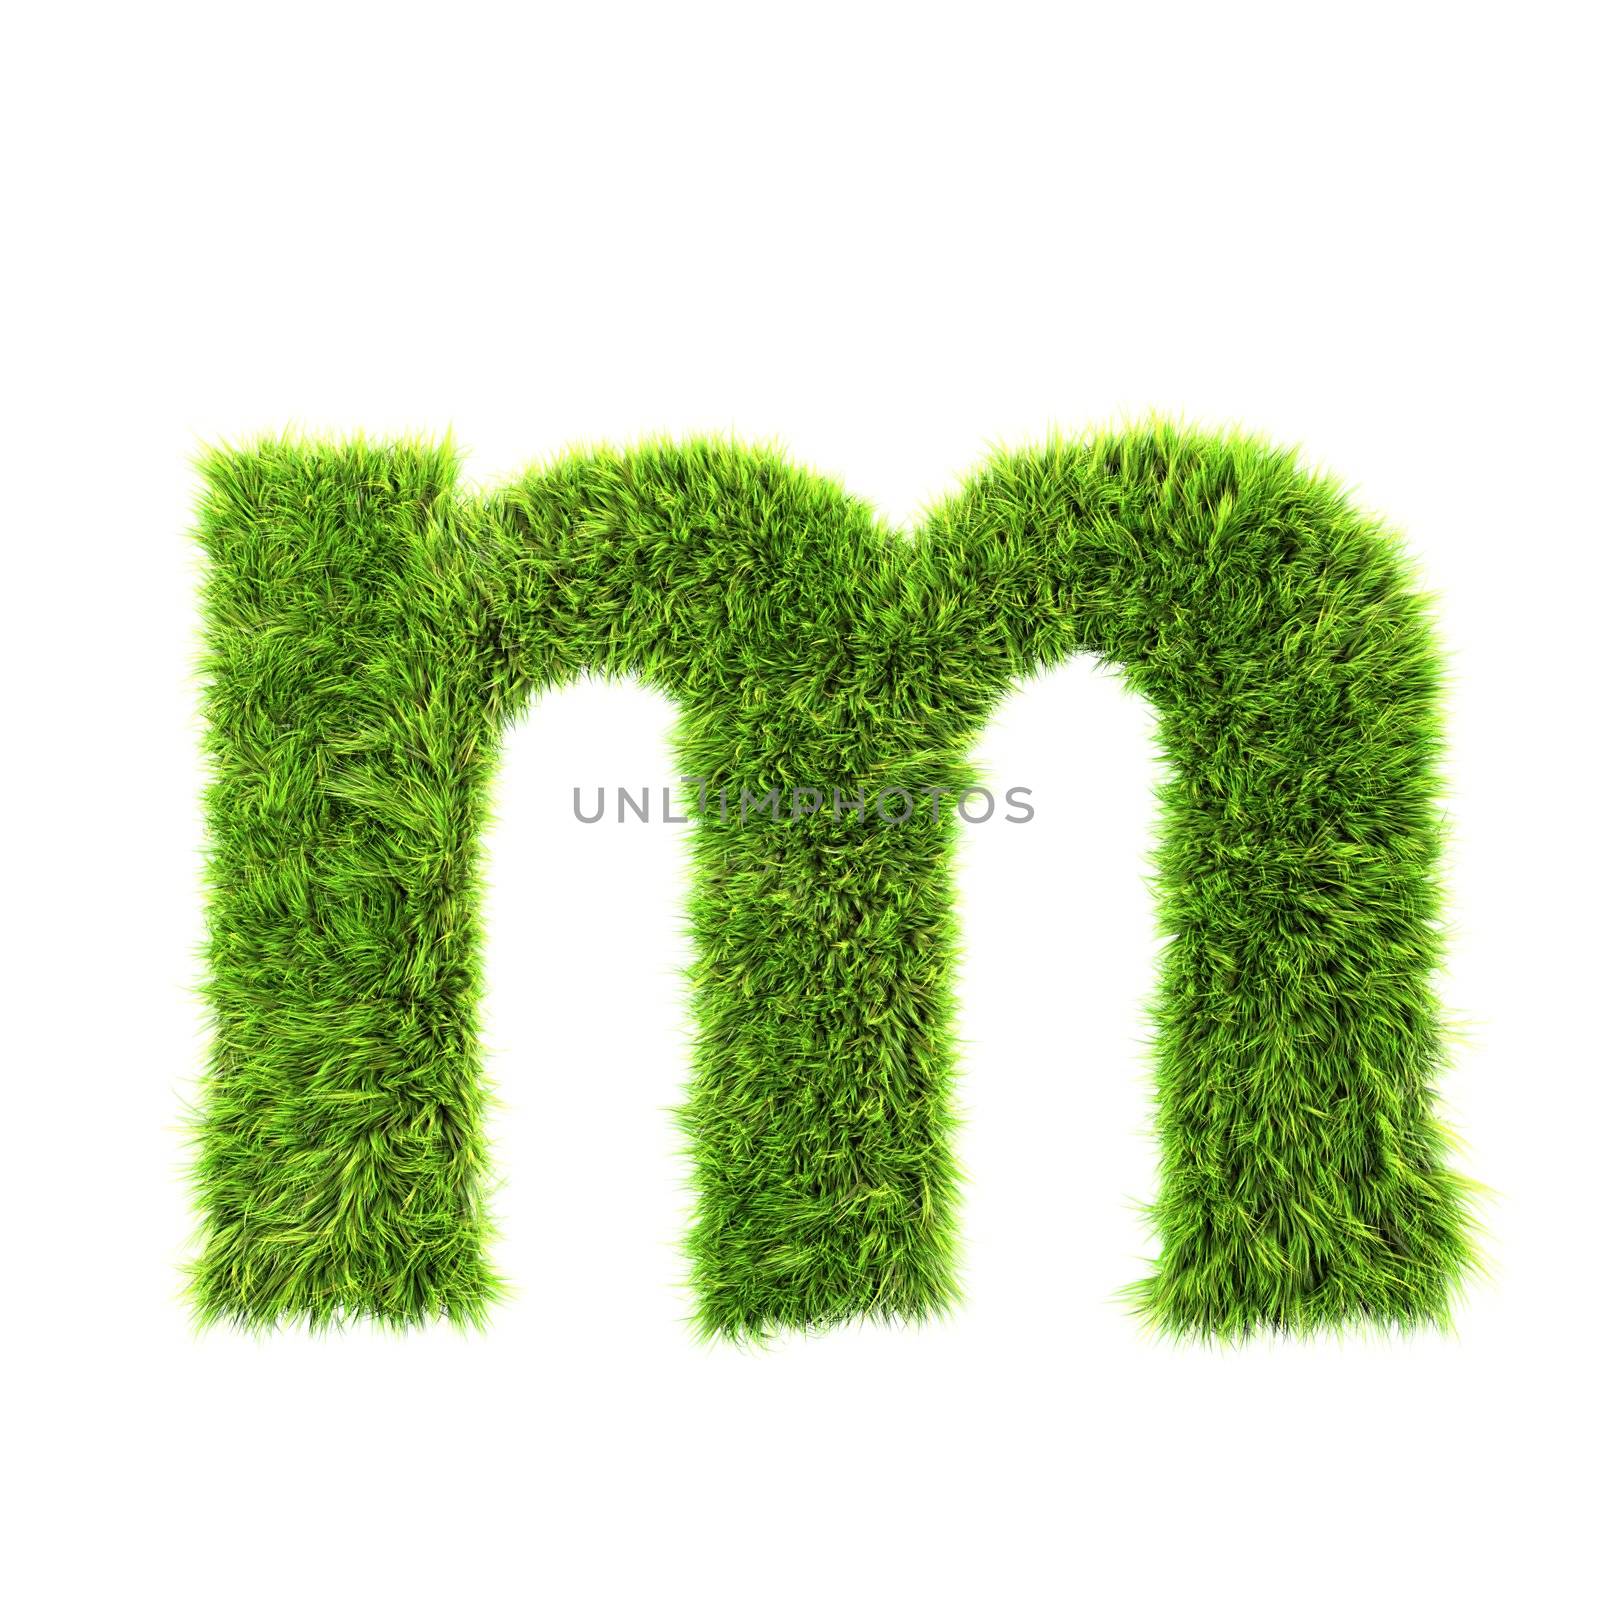 3d grass letter isolated on white background - m